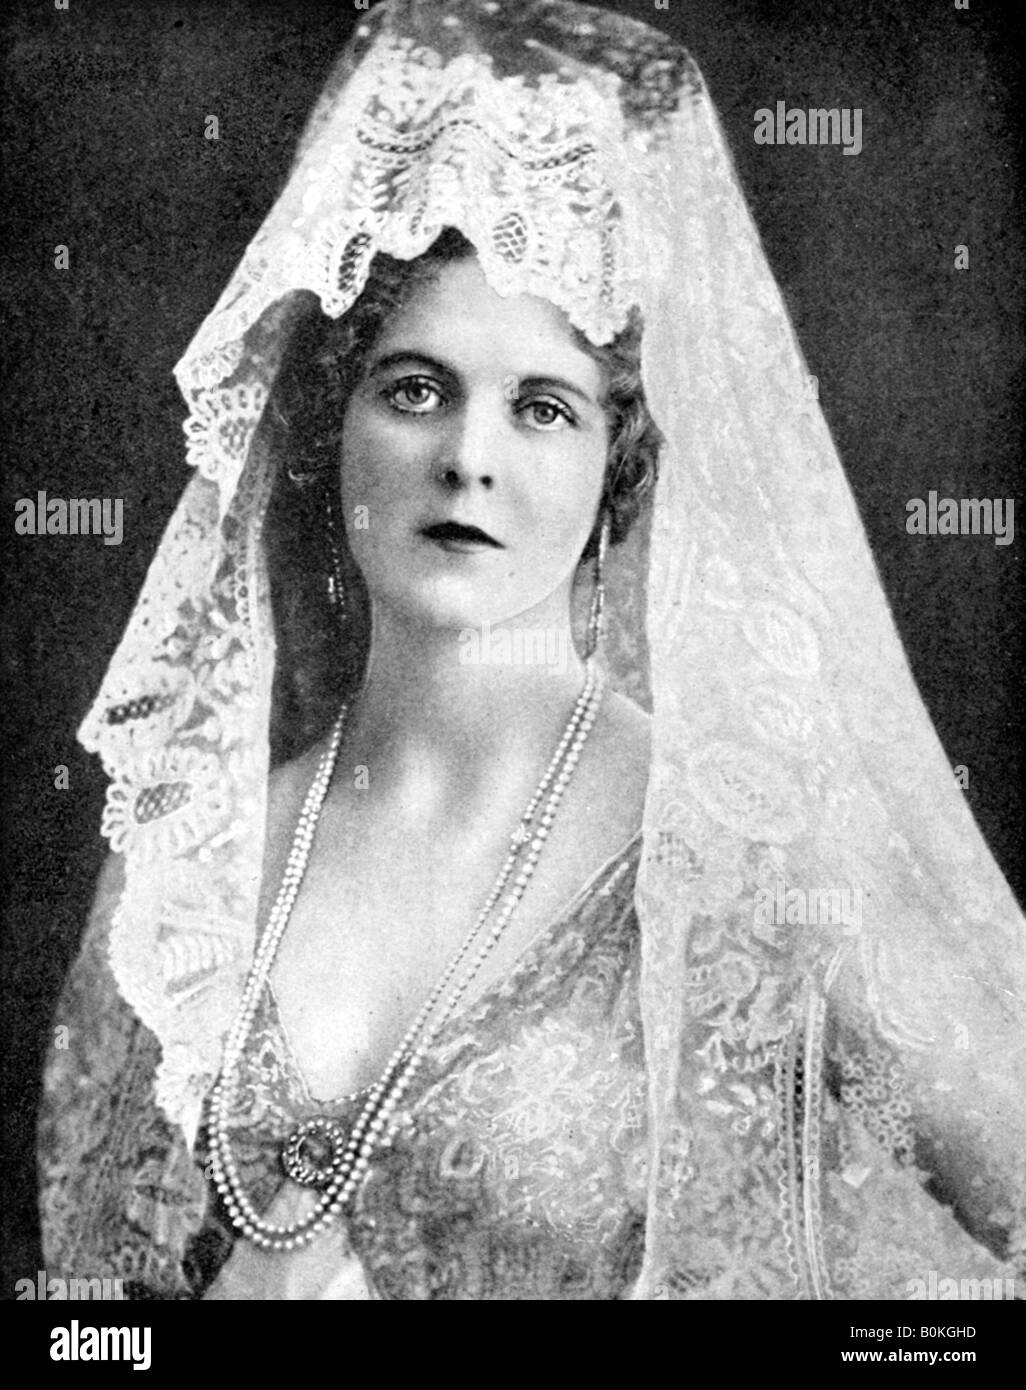 Woman wearing a lace mantilla, Andalusia, Spain, 1936. Artist: Fox Stock Photo